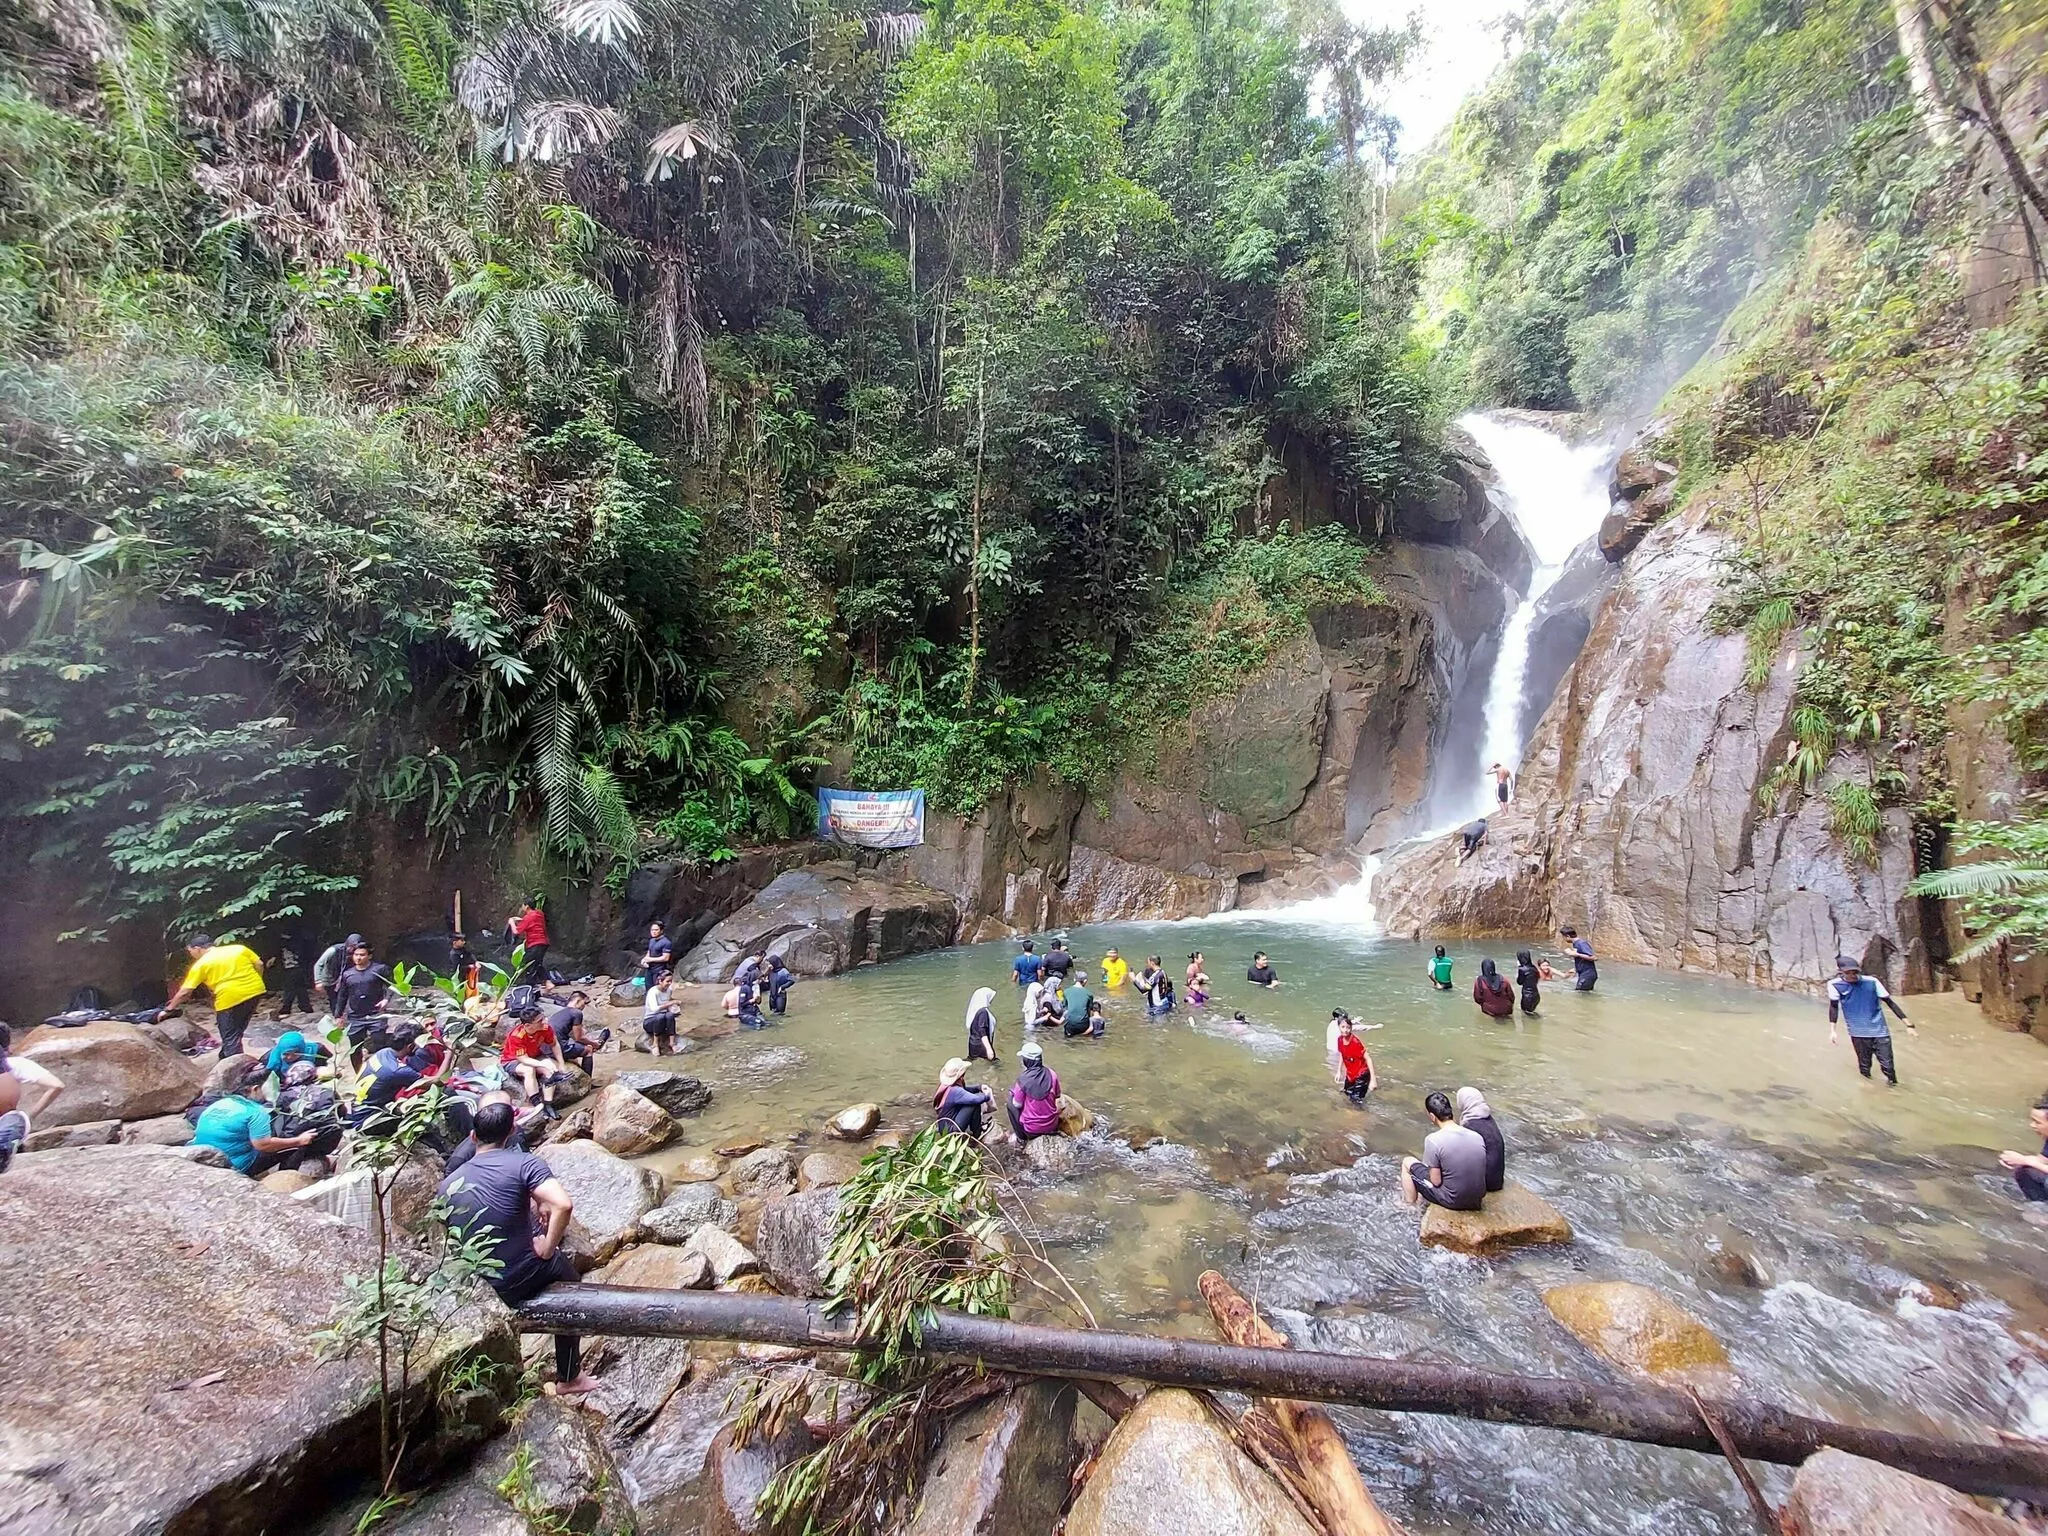 Chiling Waterfall in Malaysia, East Asia | Trekking & Hiking - Rated 0.8